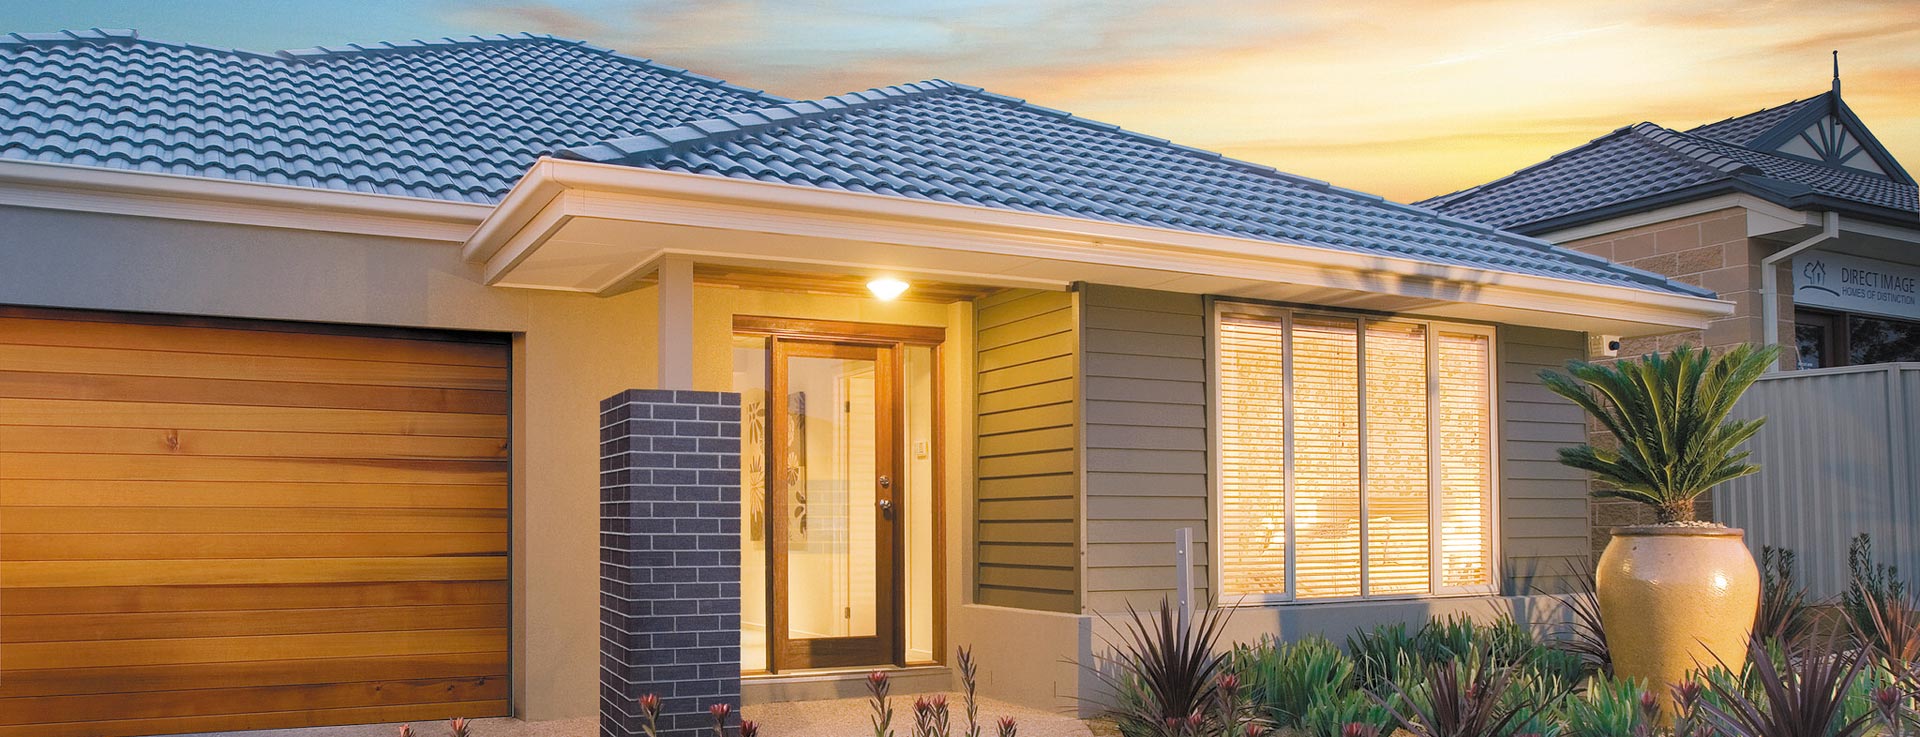 <div><h2>RE-ROOFING<span>MELBOURNE</span></h2><p>With 15 crews we can service clients throughout Melbourne and Gippsland.</p><a href='services'>Learn More</a></div>